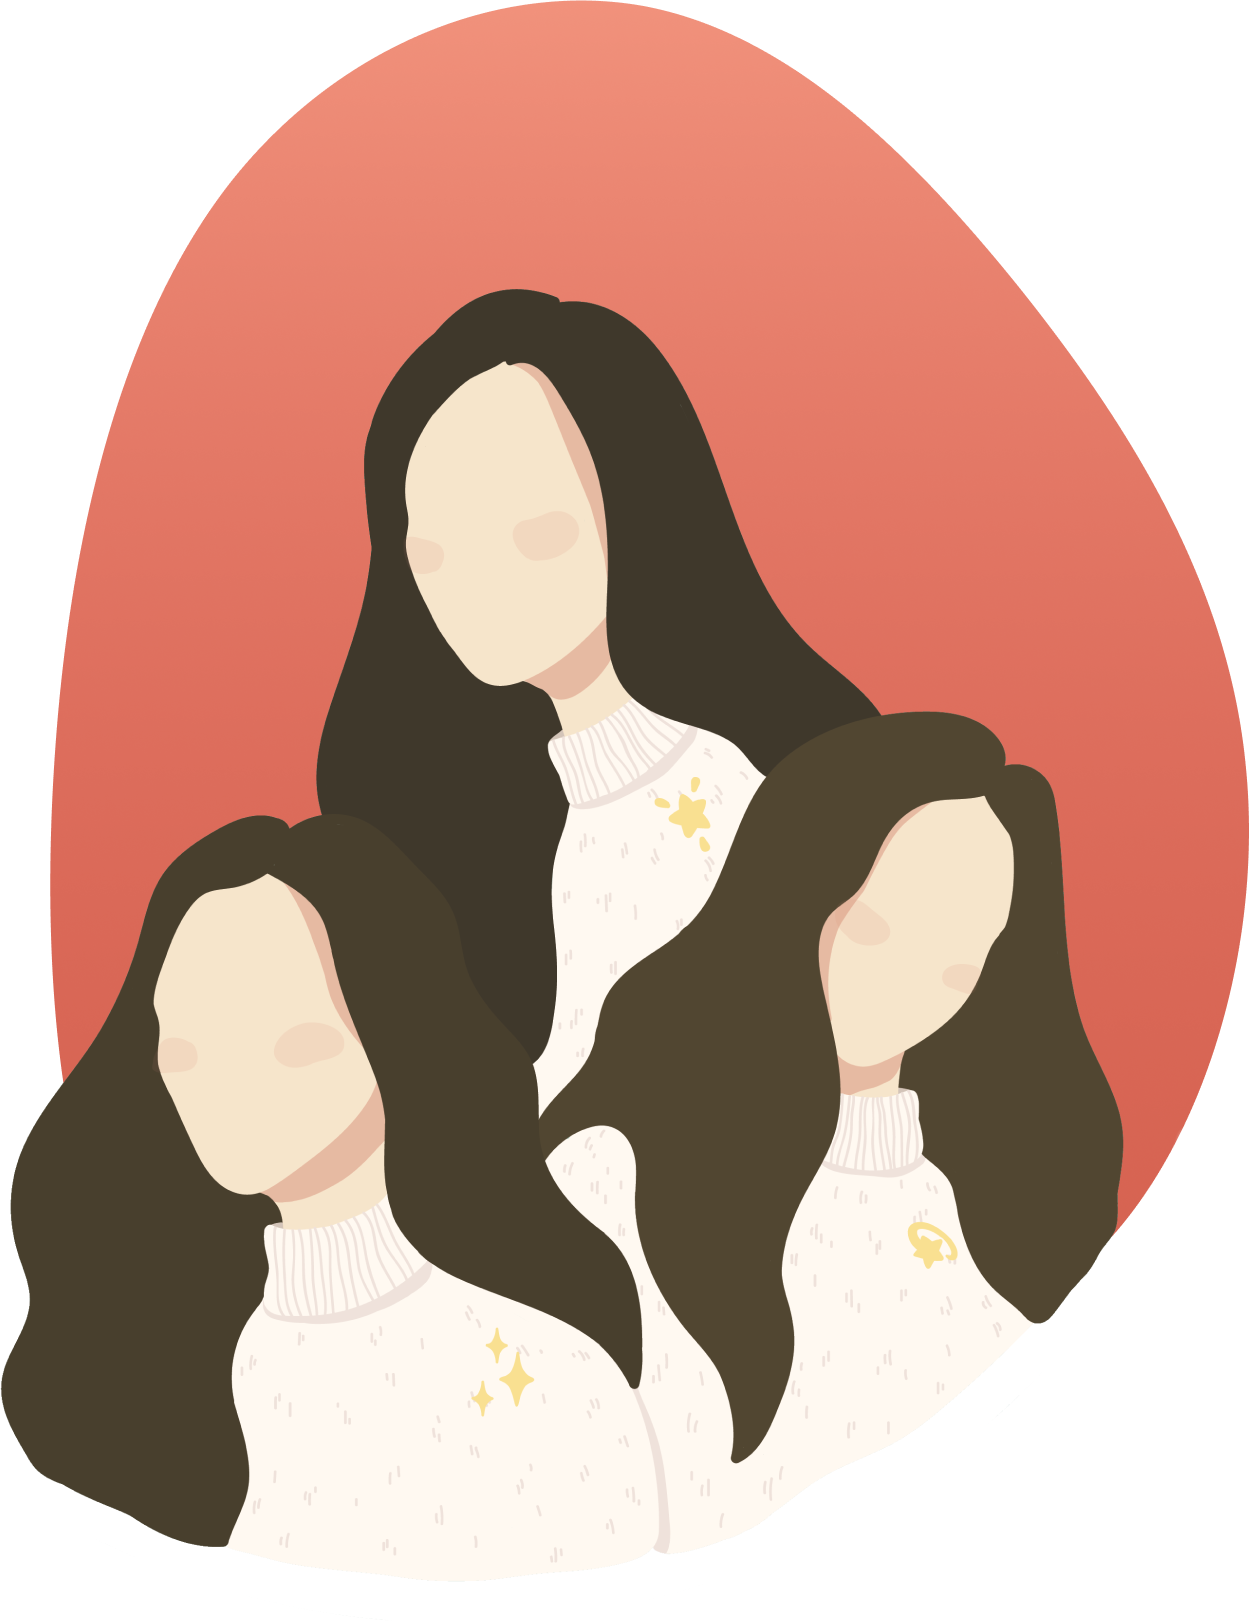 Pictured is an illustration of three abstract portraits of a girl with dark brown hair clustered around each other.